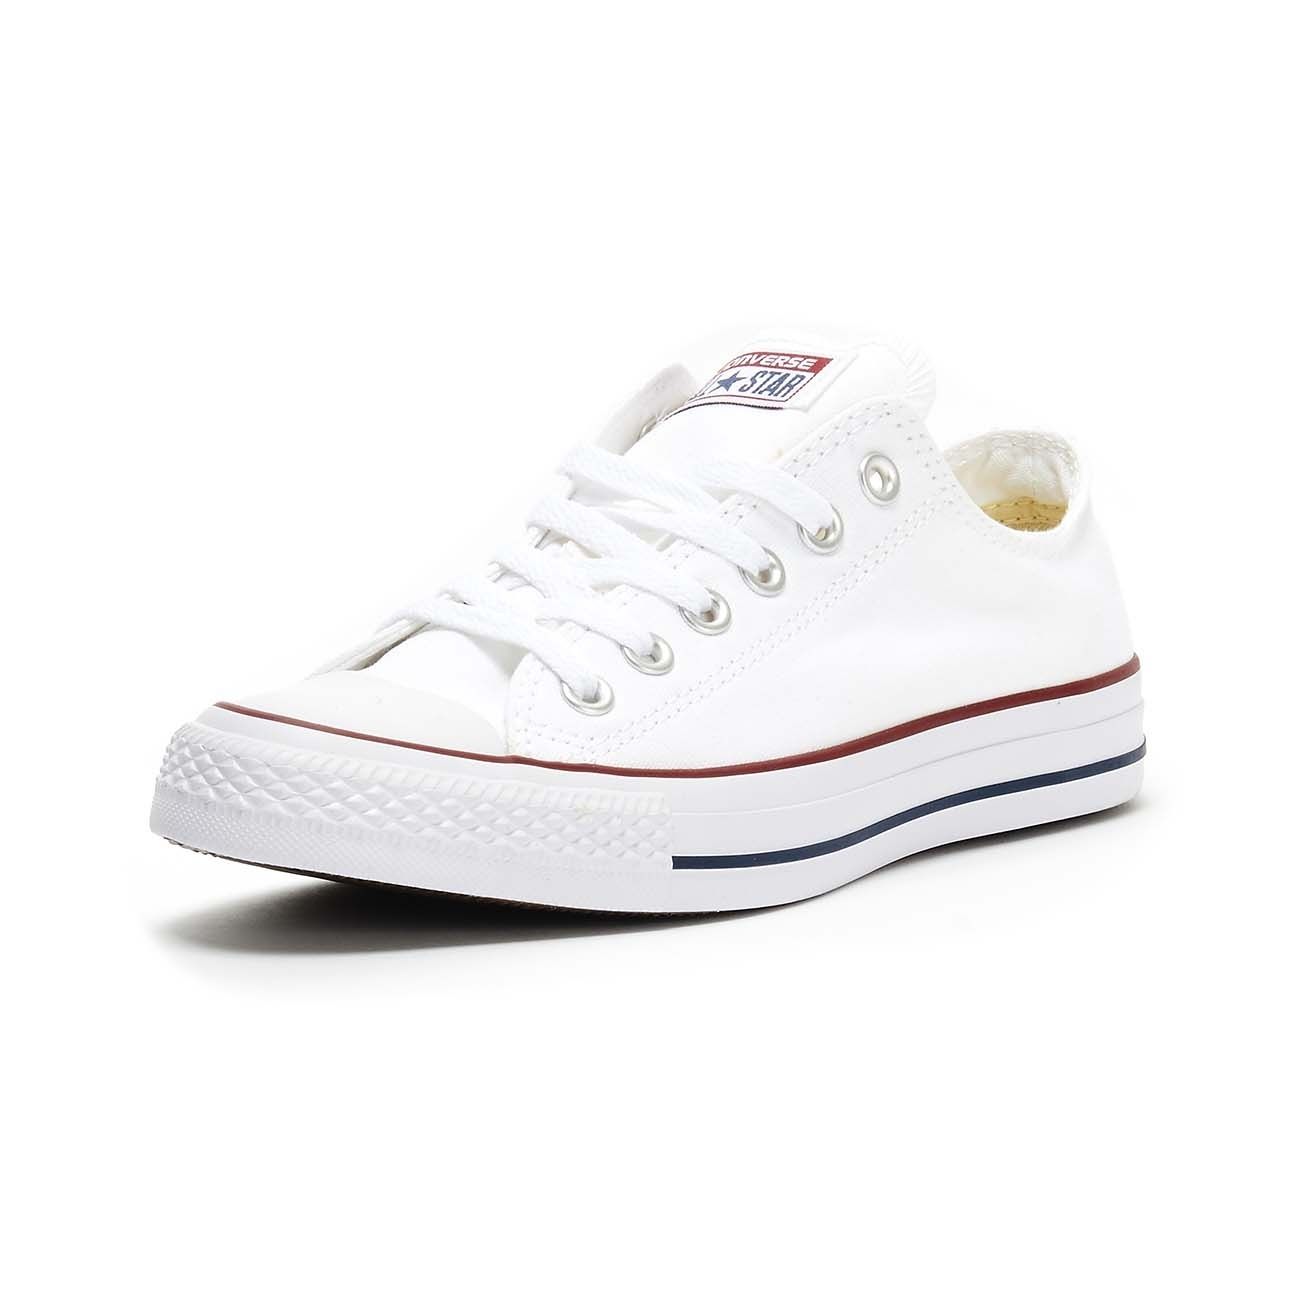 CONVERSE SNEAKERS CHUCK TAYLOR ALL STAR OX Men Optical white 